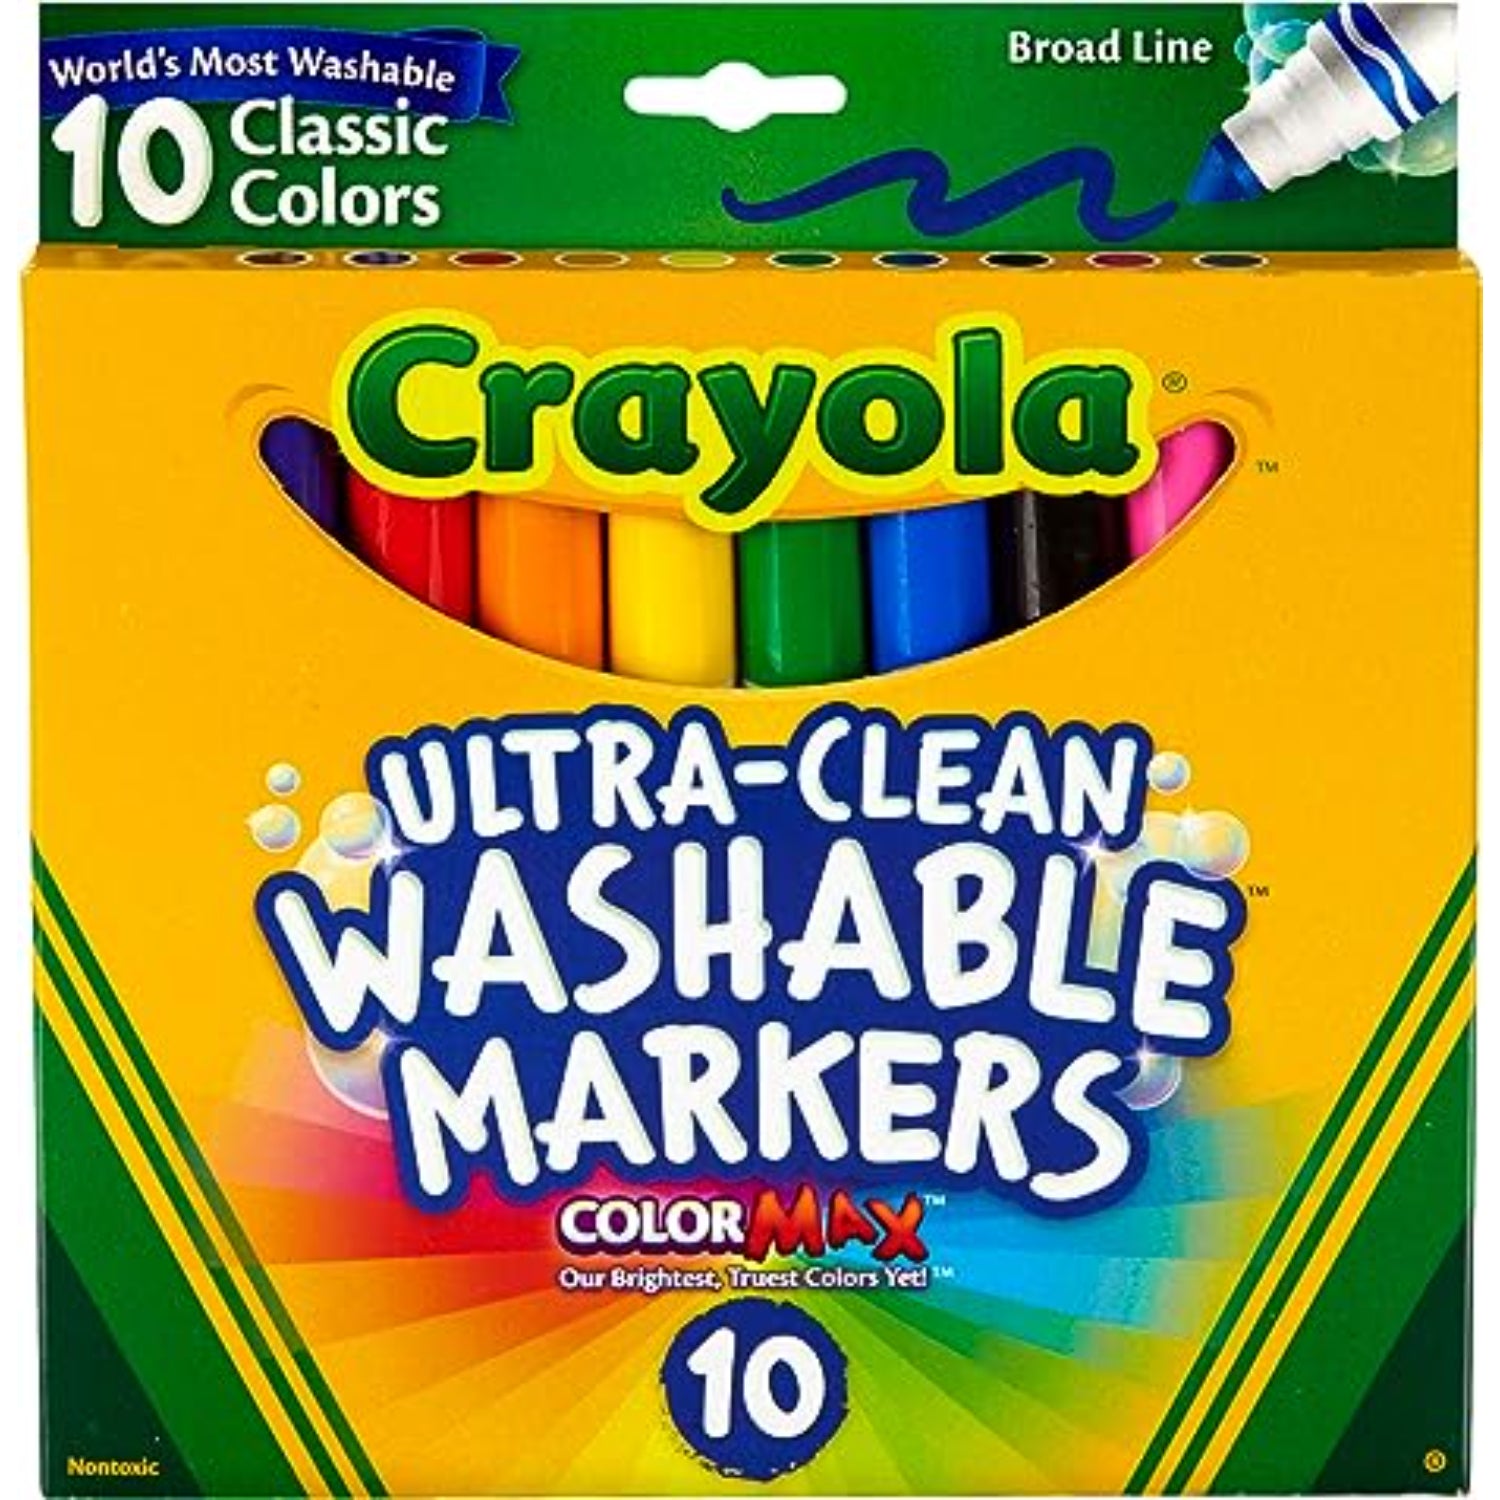 Broad Line Markers, Bright Colors, 10 Count, Crayola.com